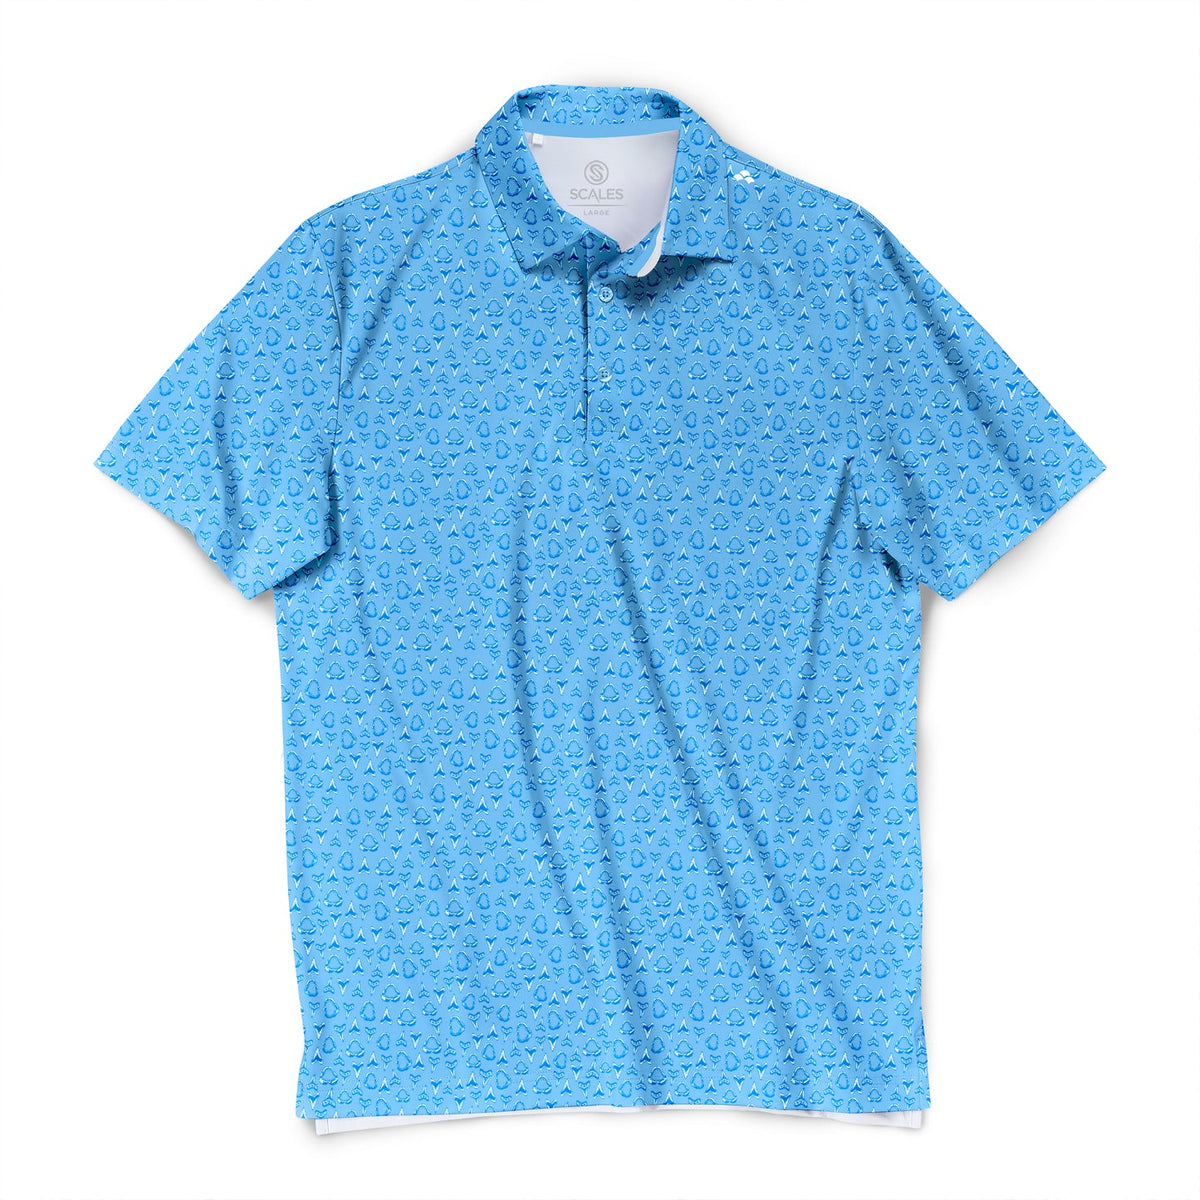 SCALES Jaws Polo